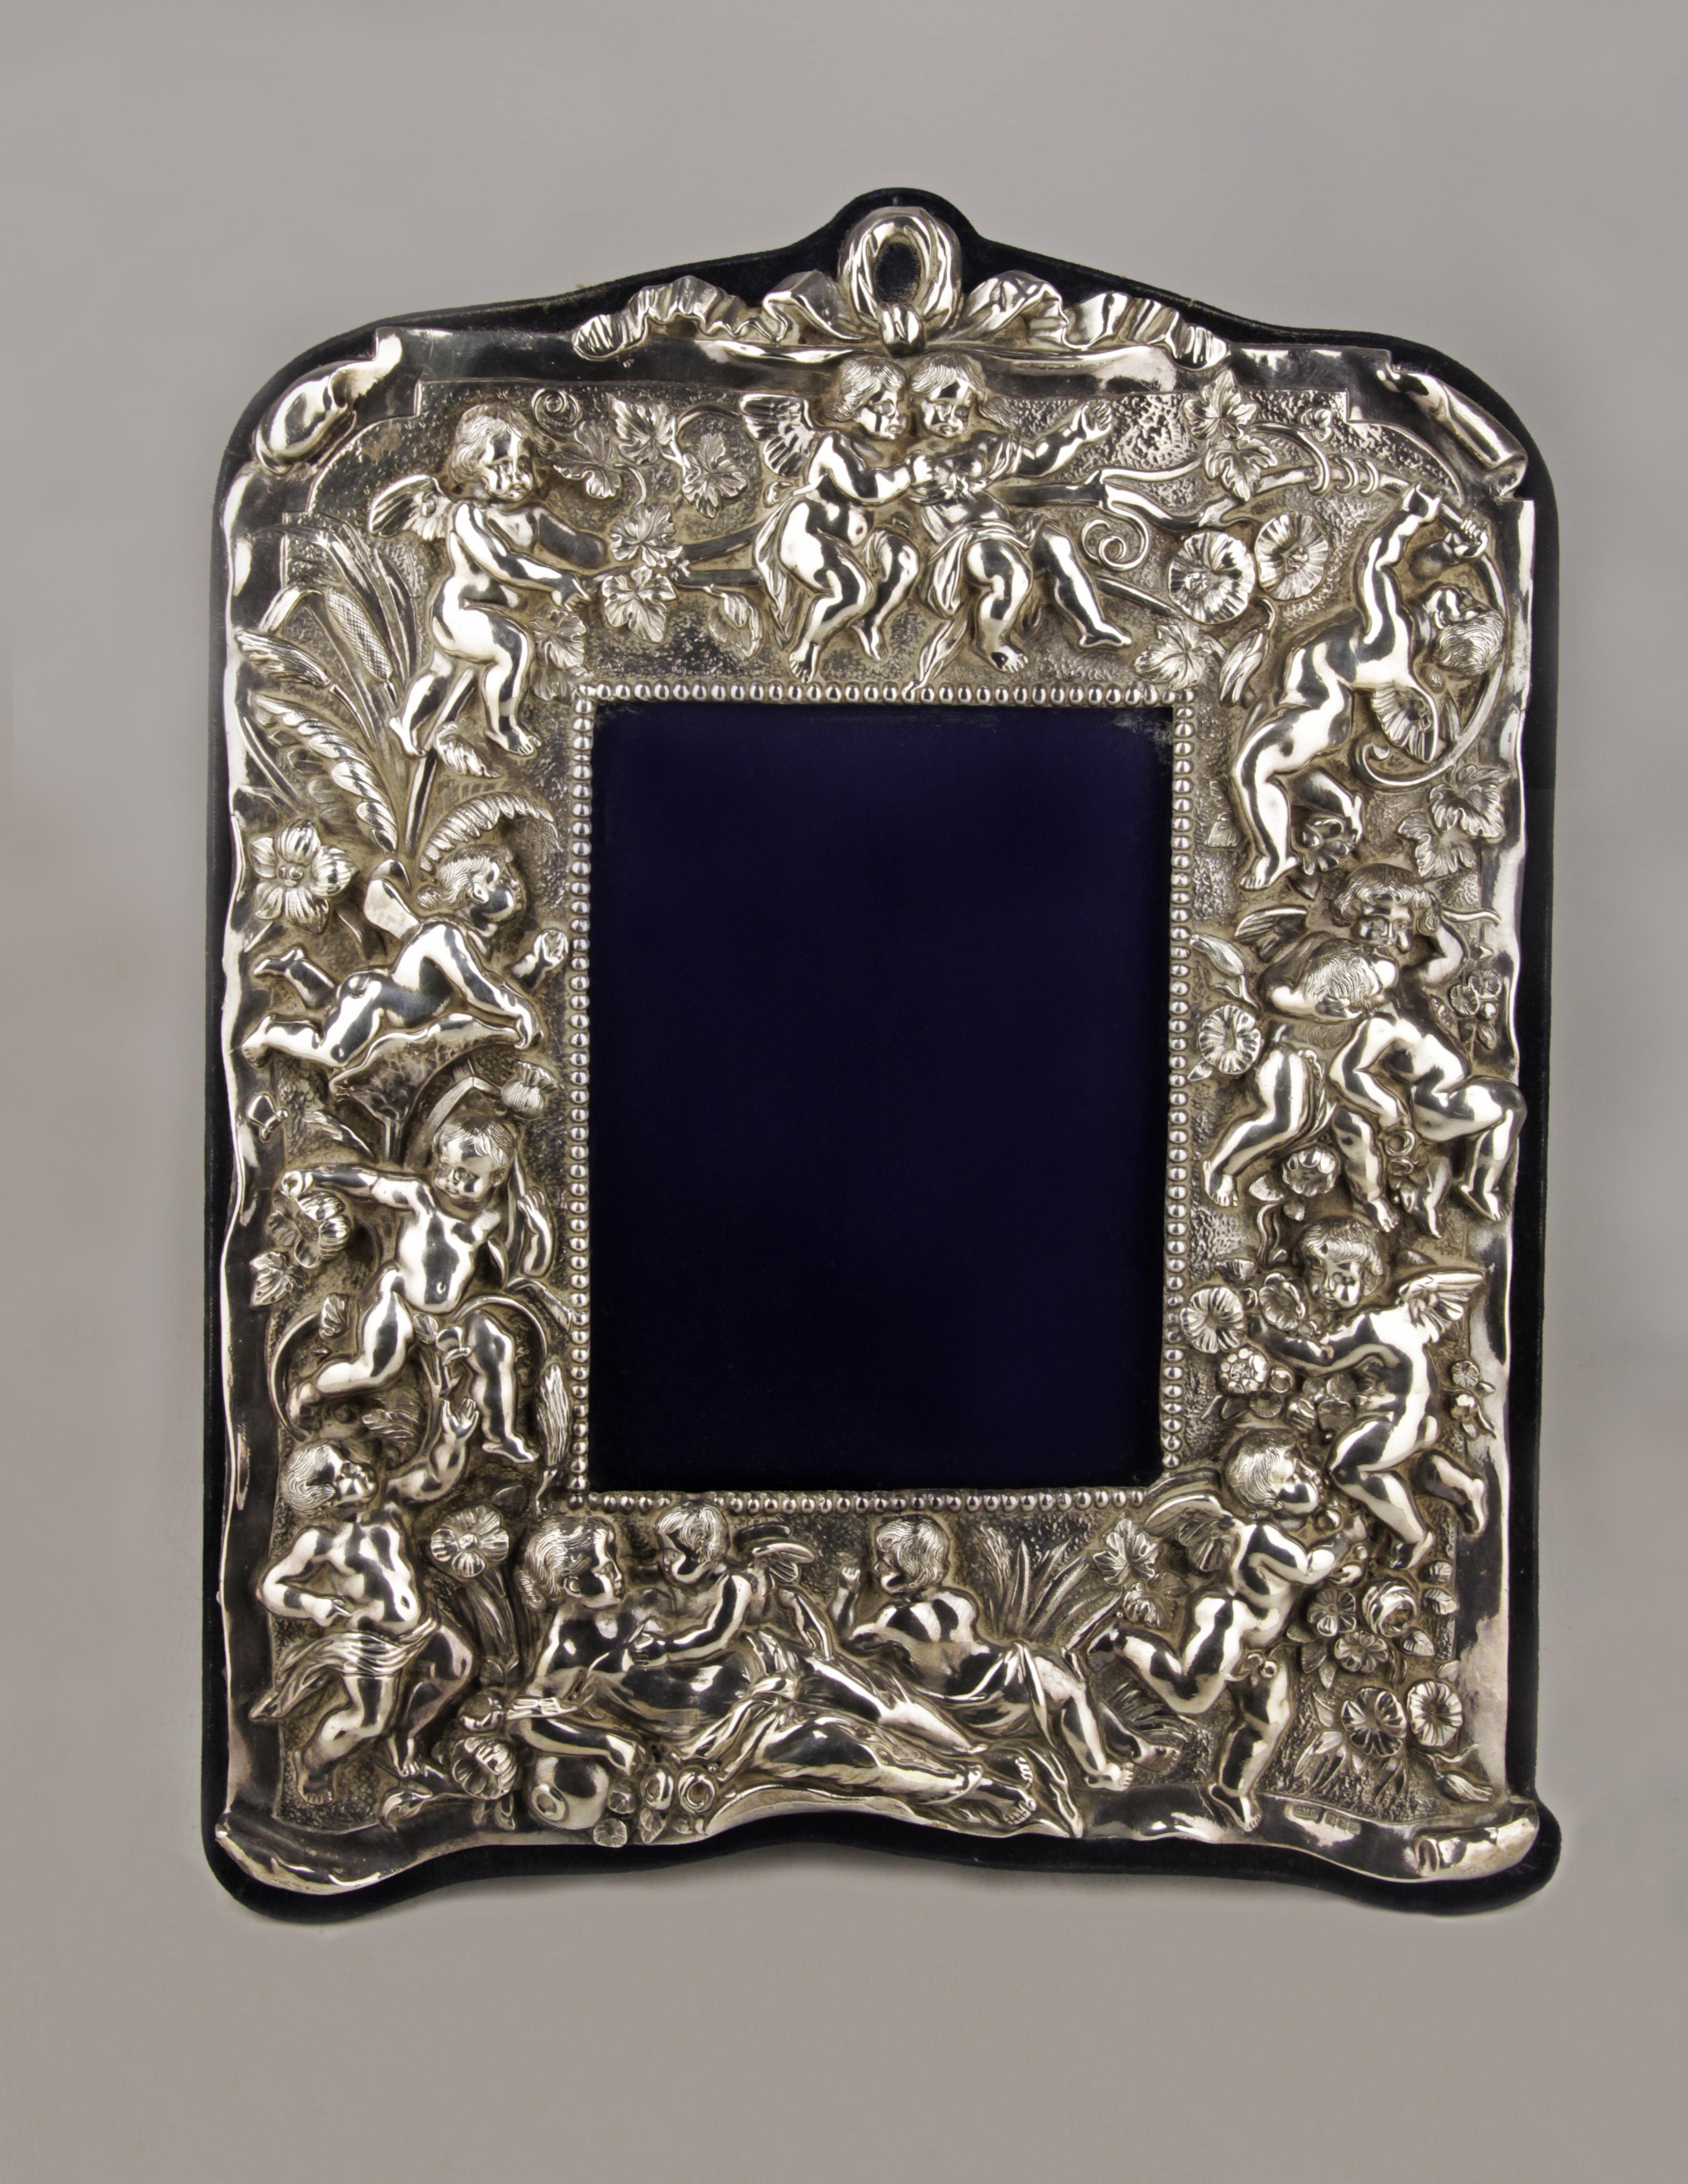 Arts and Crafts Late 20th Century English Sterling Silver Frame with Cherubs and Plant Motifs